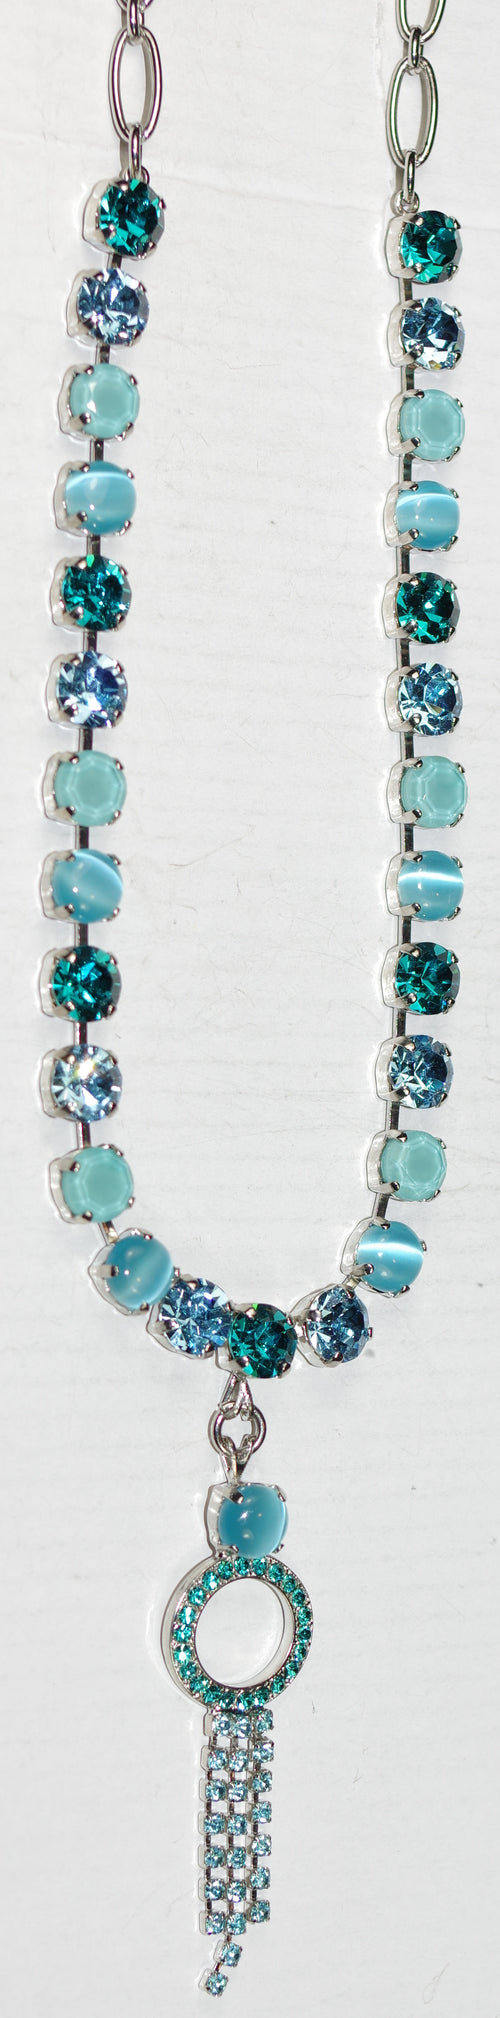 MARIANA NECKLACE ADDICTED TO LOVE: teal, blue stones in silver rhodium setting, 2" long charm, 17" adjustable chain